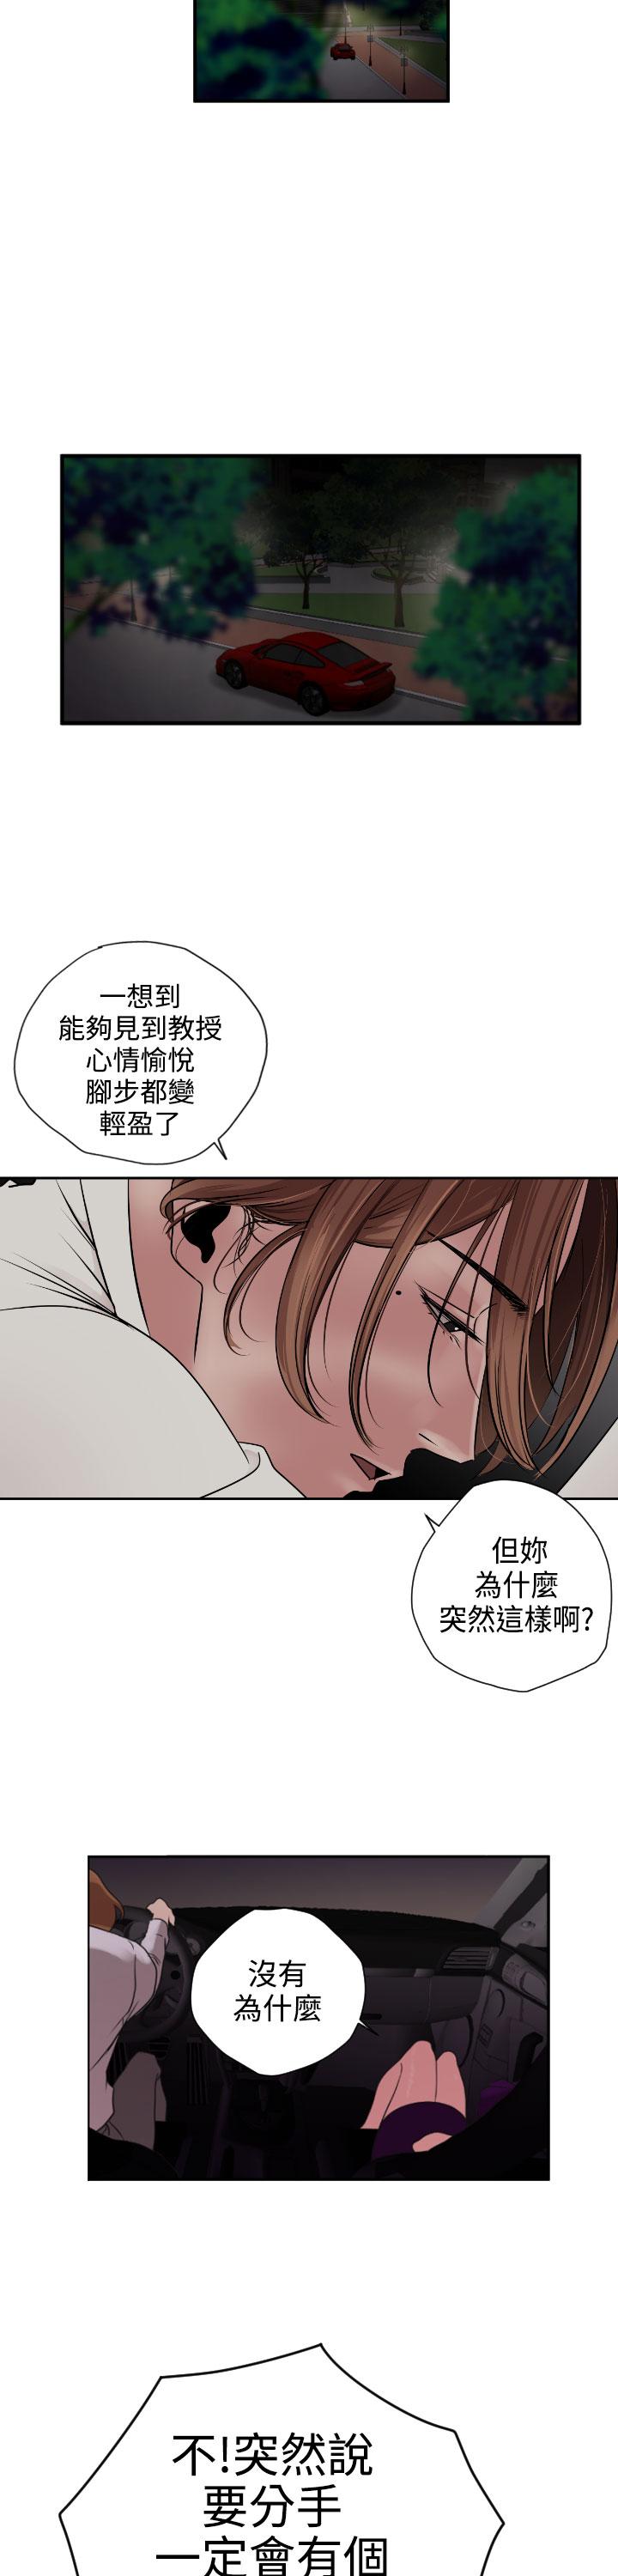 Desire King (慾求王) Ch.1-12 (chinese) 73